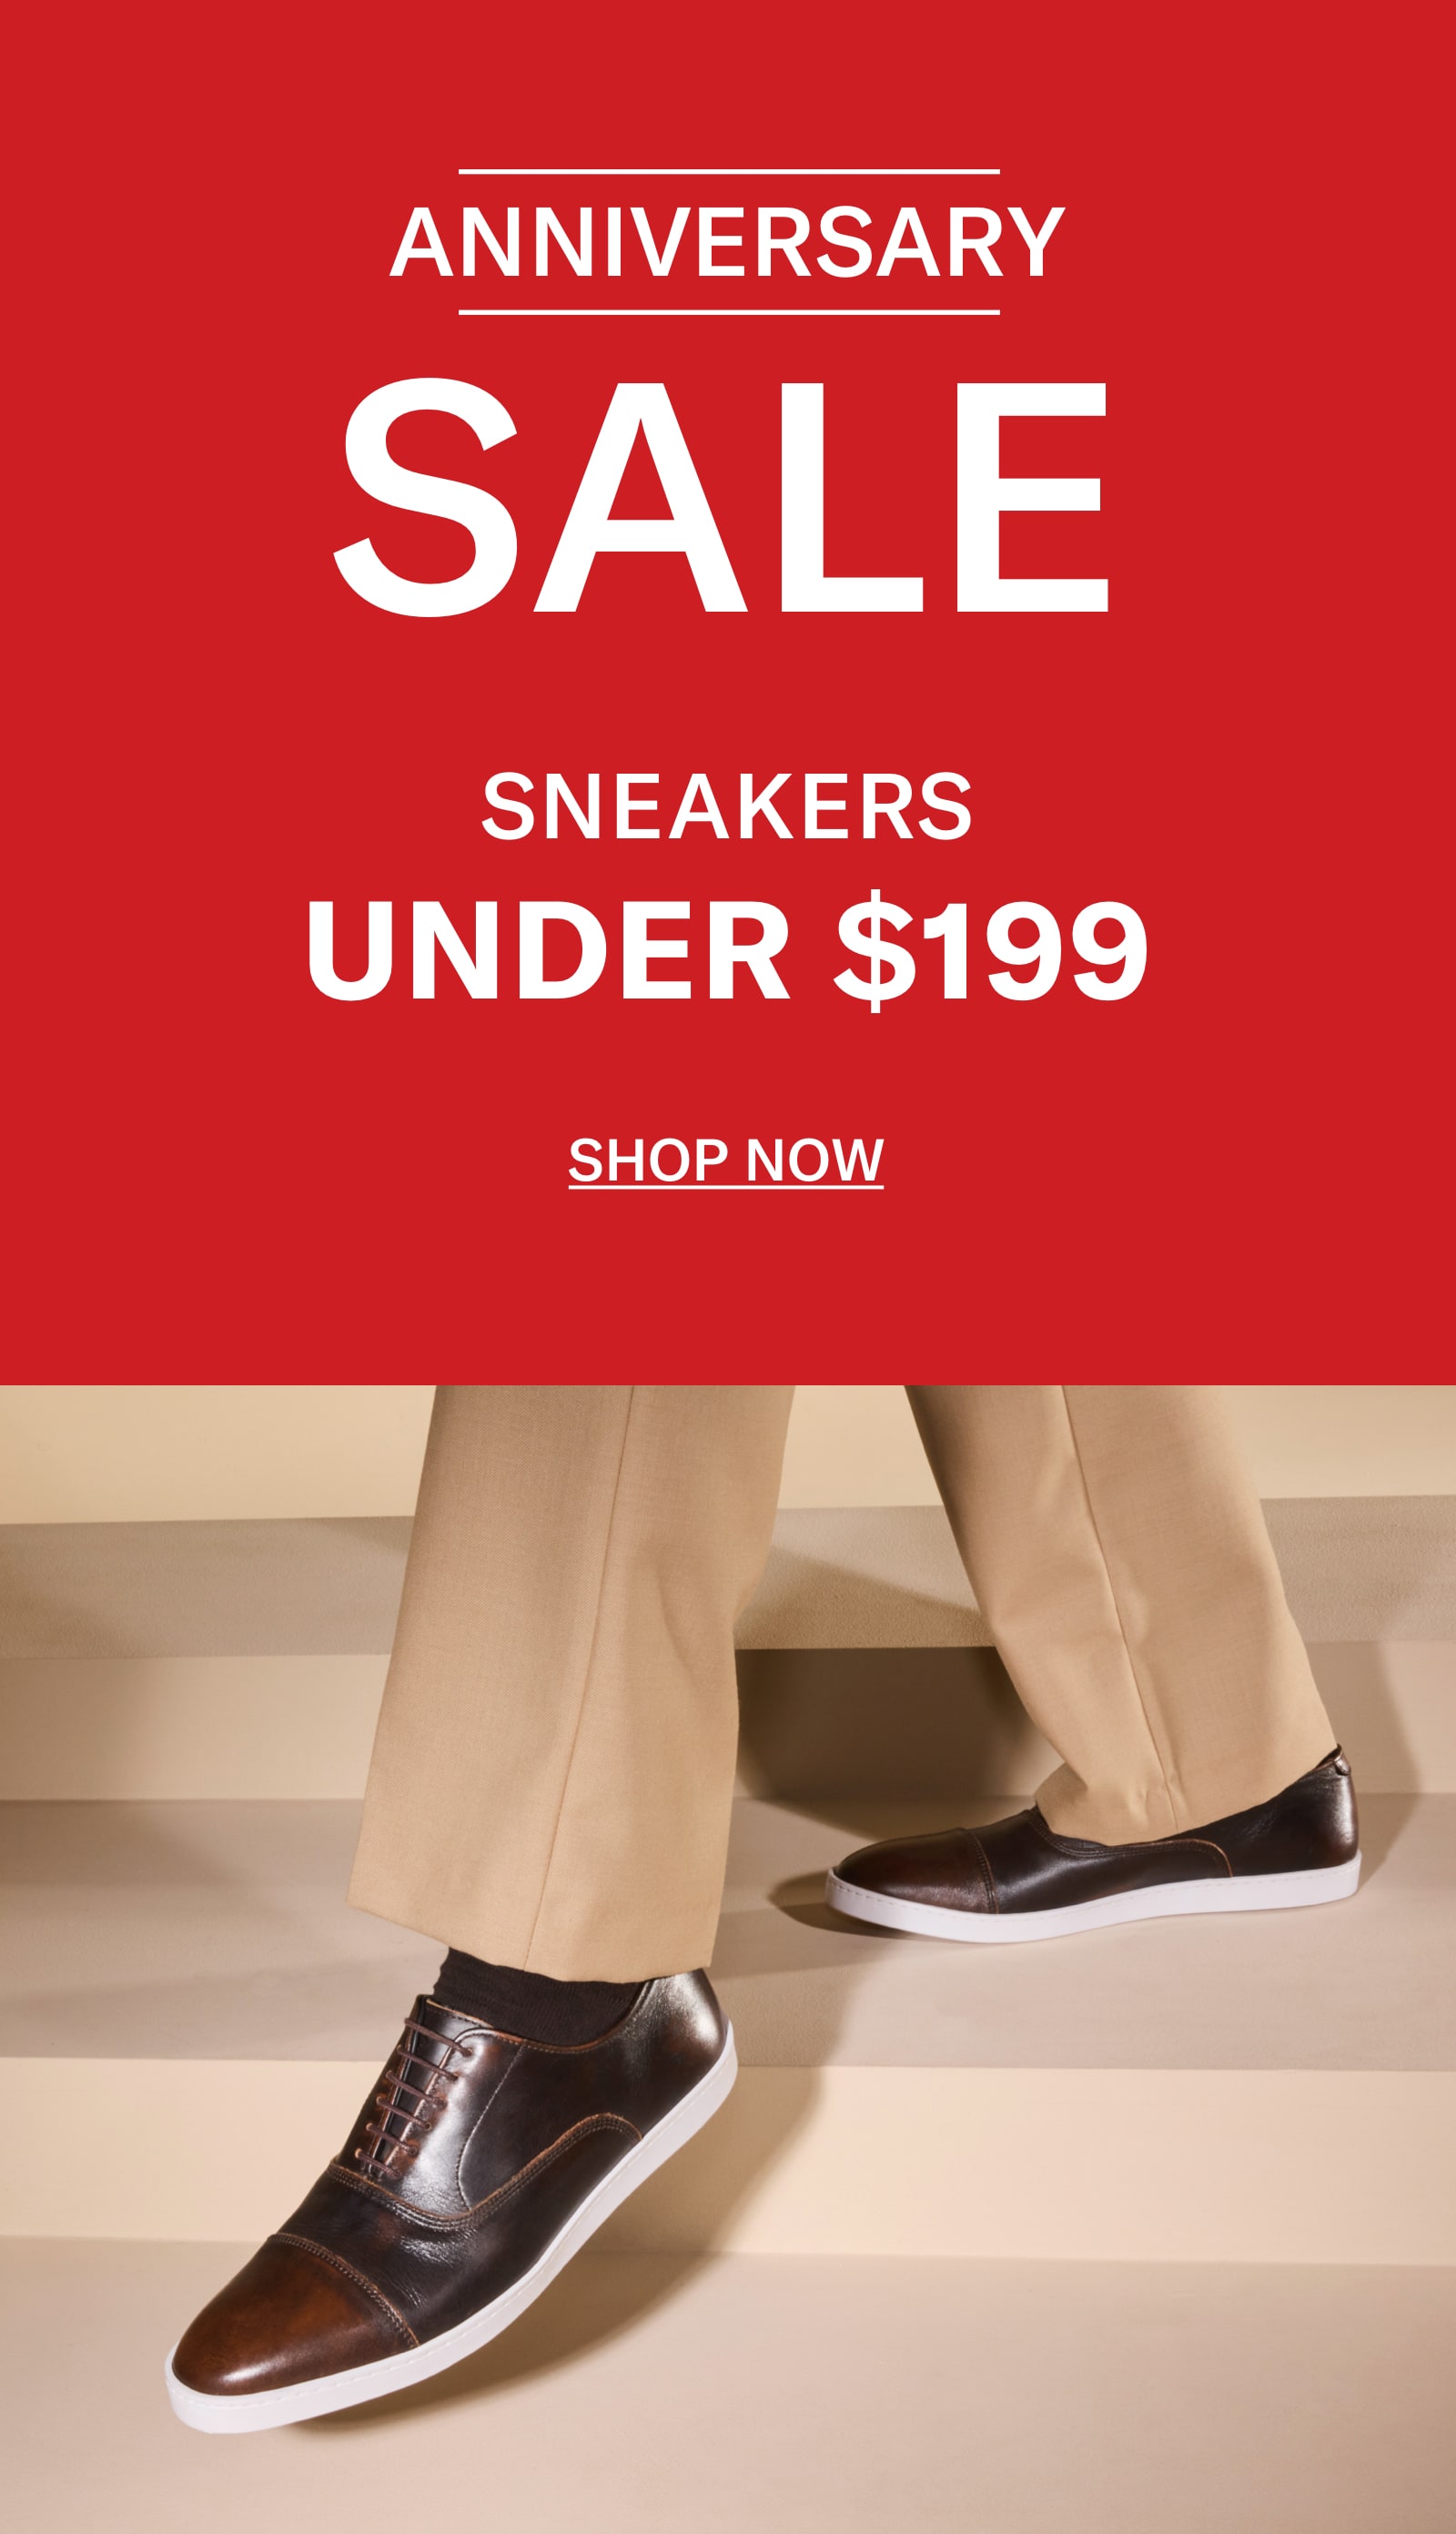 Anniversary Sale | Sneakers Under $199 | Shop Now